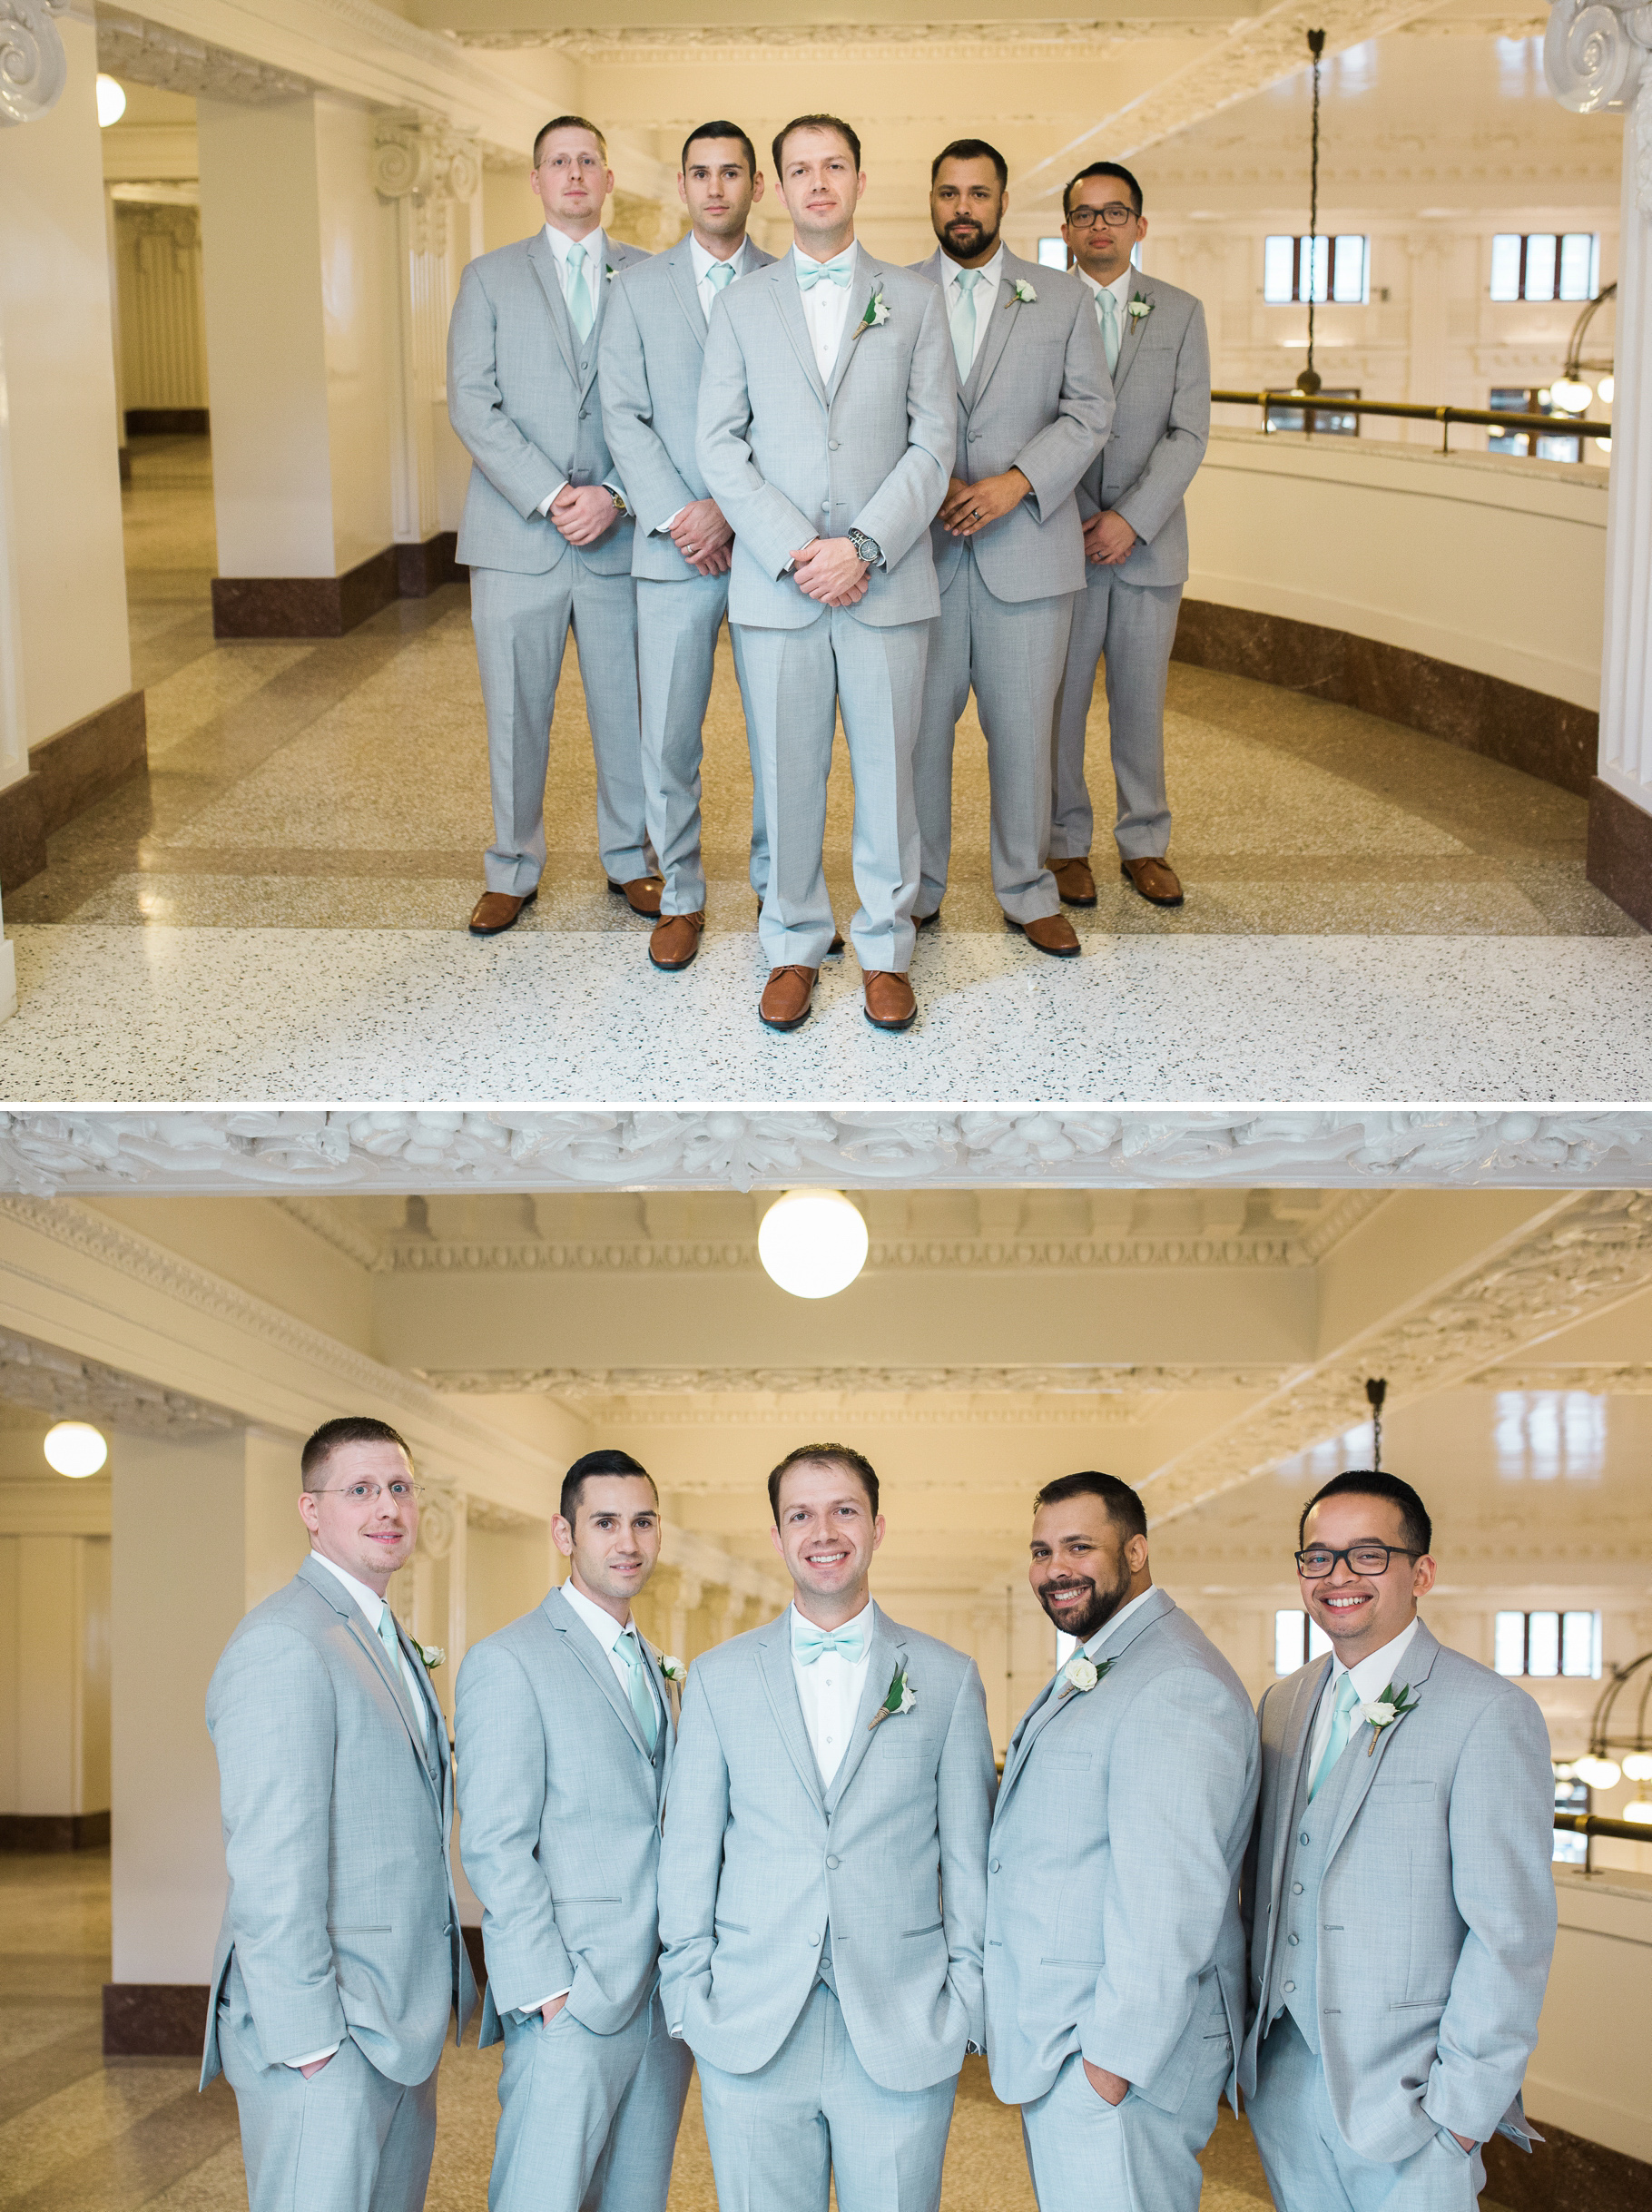 16-King-Street-Station-Pioneer-Square-groomsmen-portraits-Pacific-Tower-Seattle-Wedding-Photographer-Photography-by-Betty-Elaine